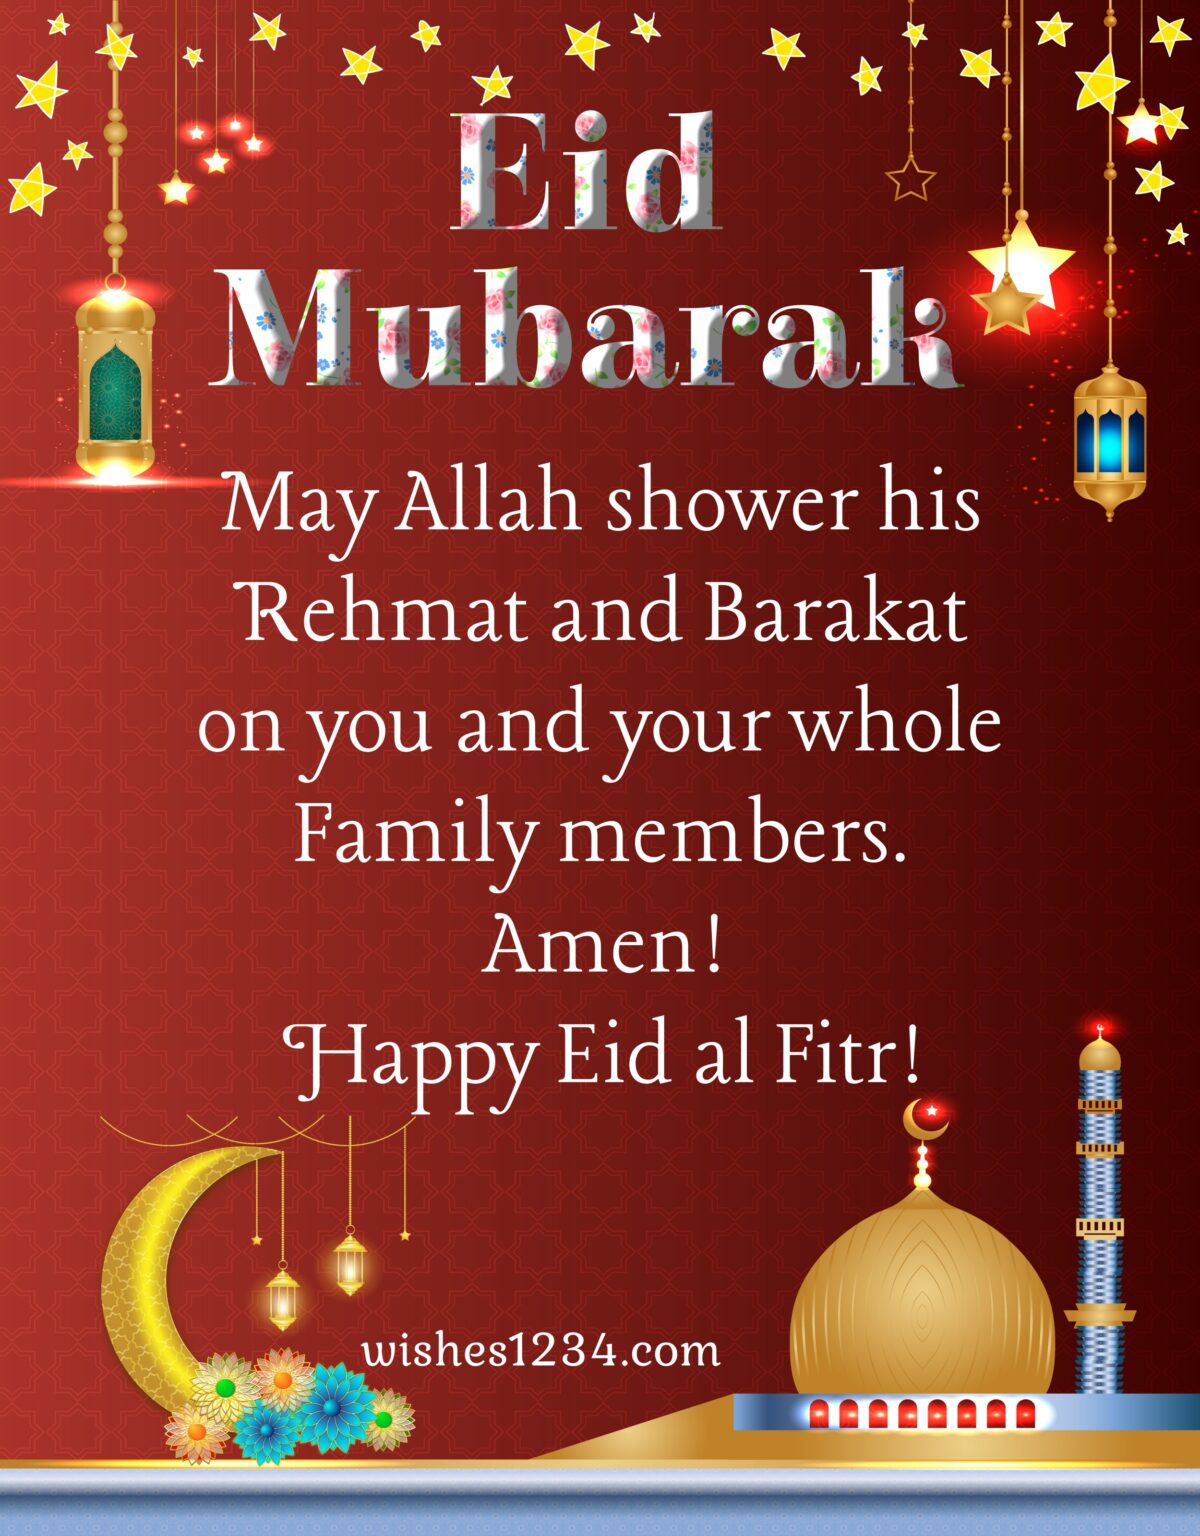 100+ Eid Mubarak Wishes, Messages and Greetings